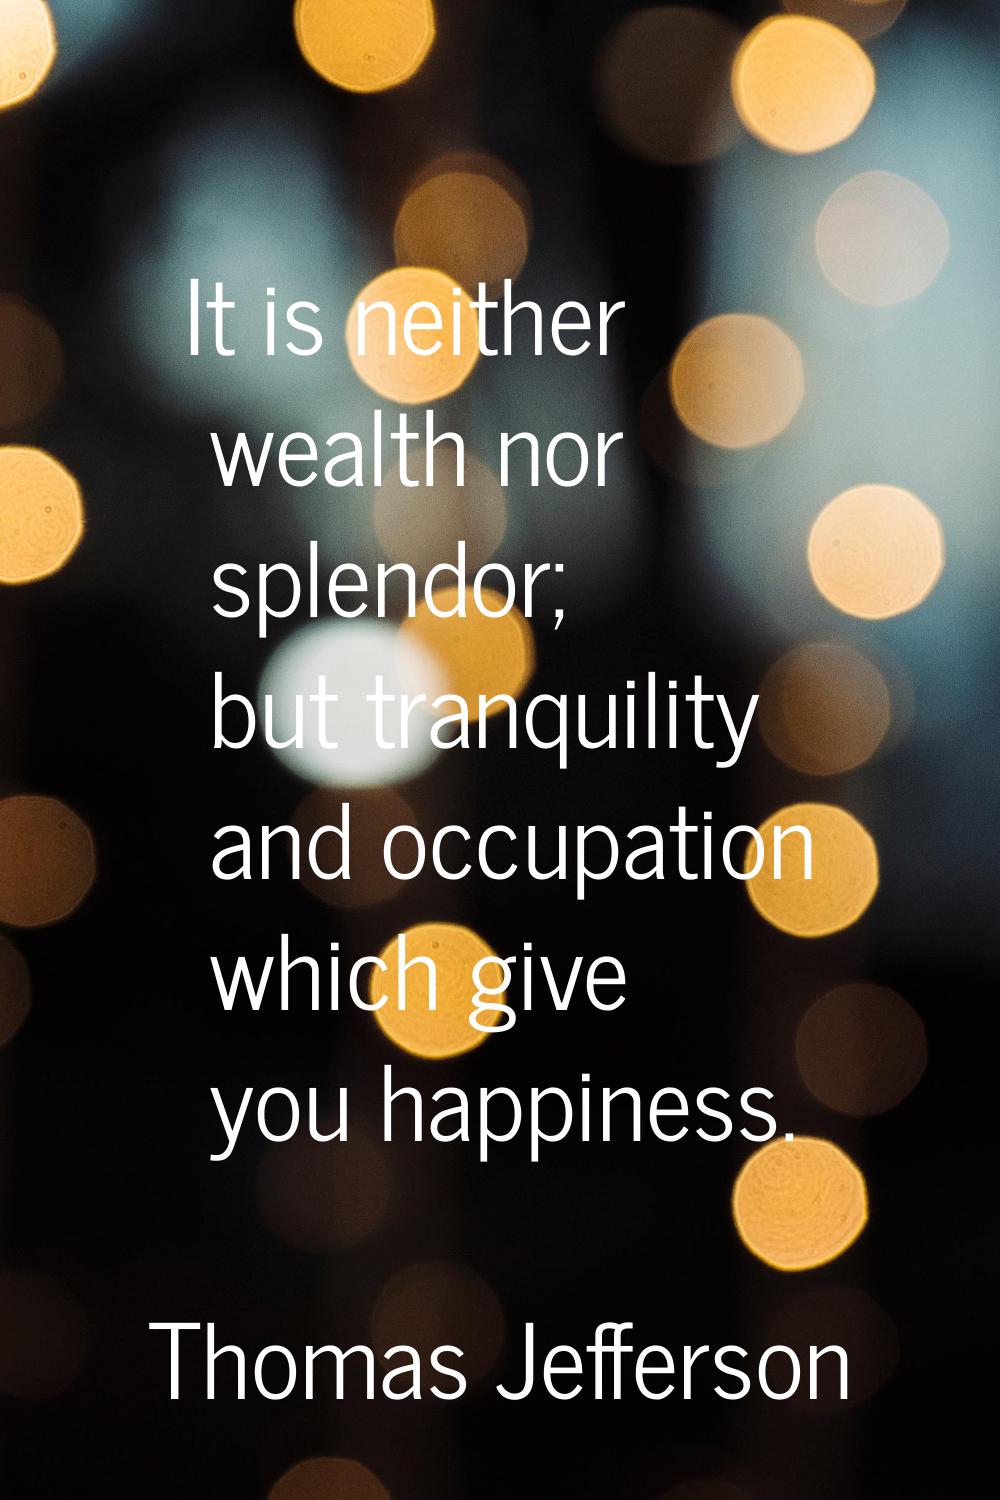 It is neither wealth nor splendor; but tranquility and occupation which give you happiness.